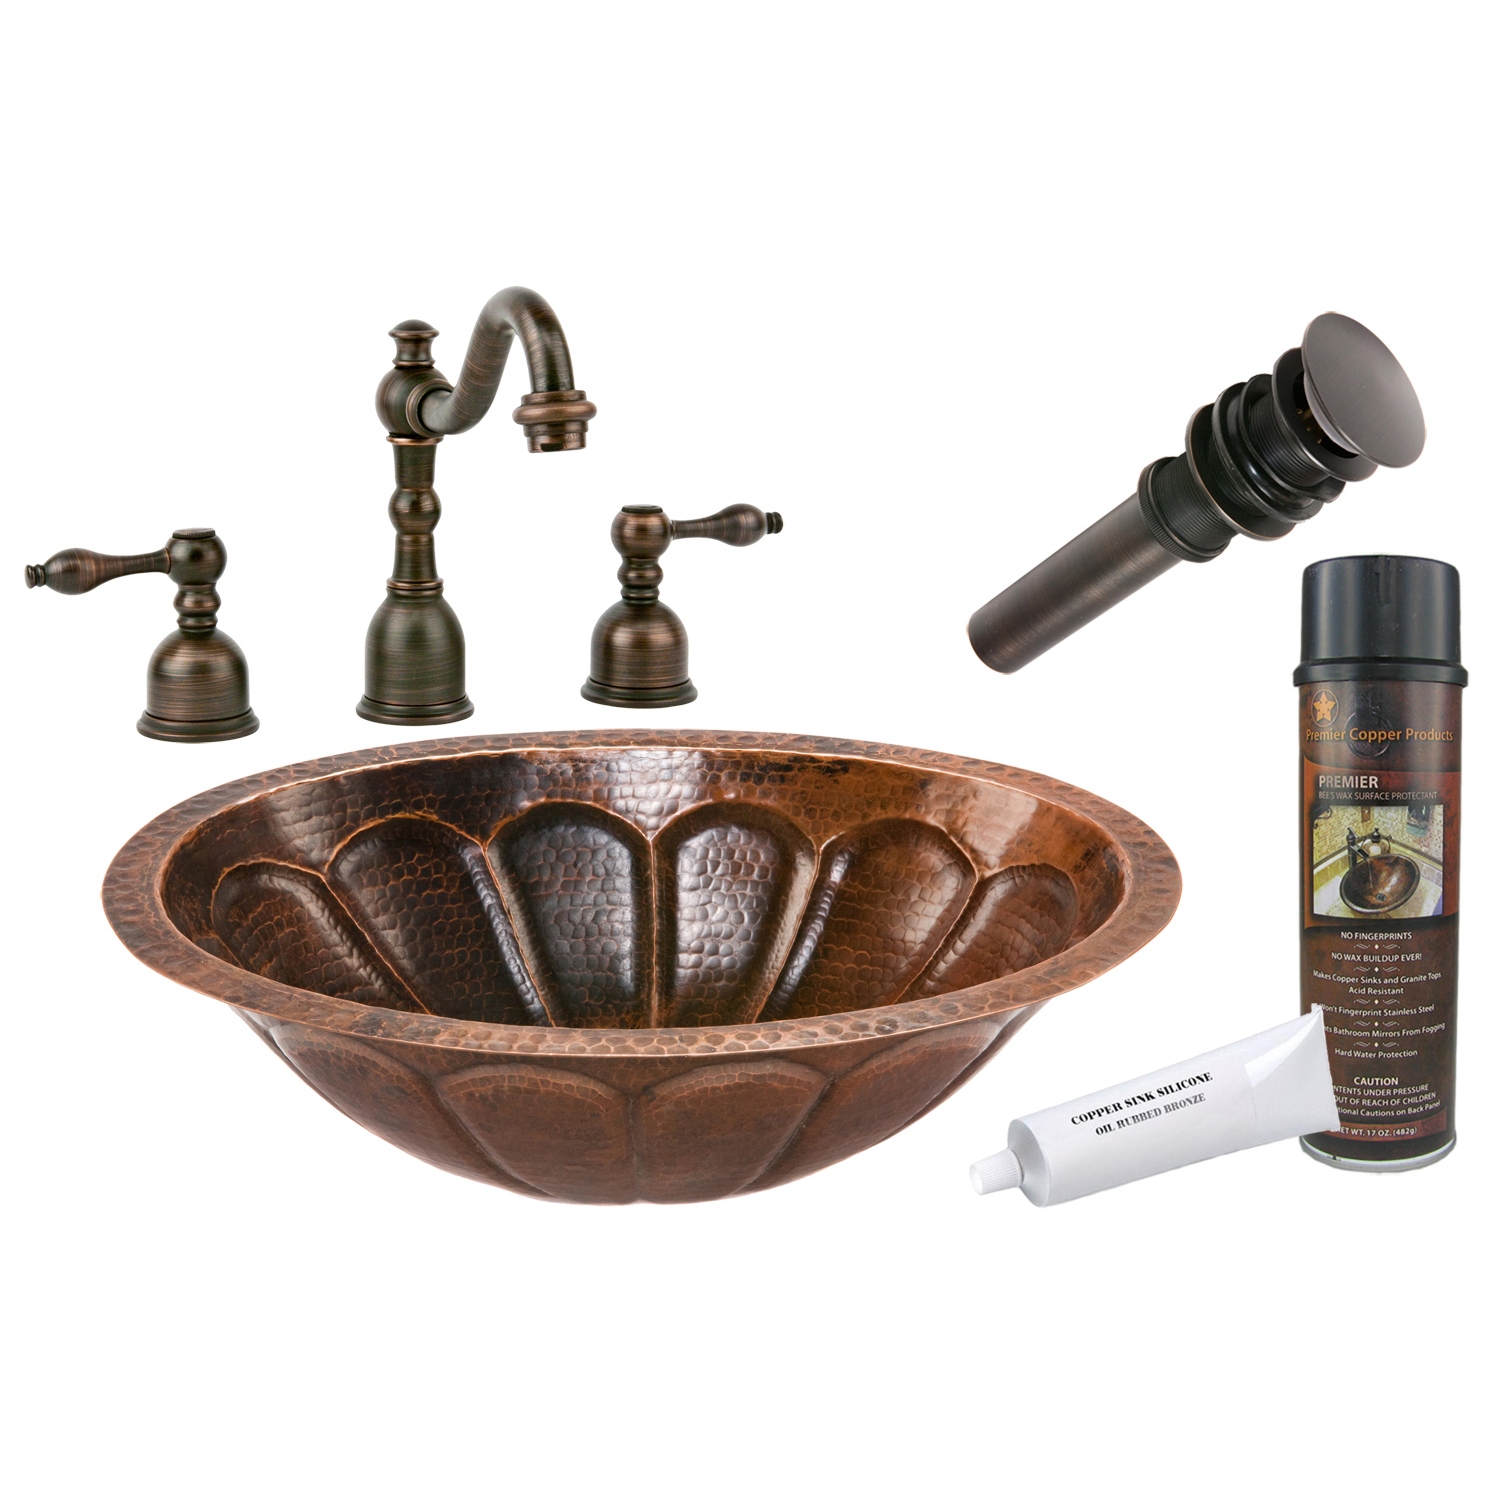 Oval Sunburst Under Counter Hc Sink, Faucet And Accessories Package, Oil Rubbed Bronze